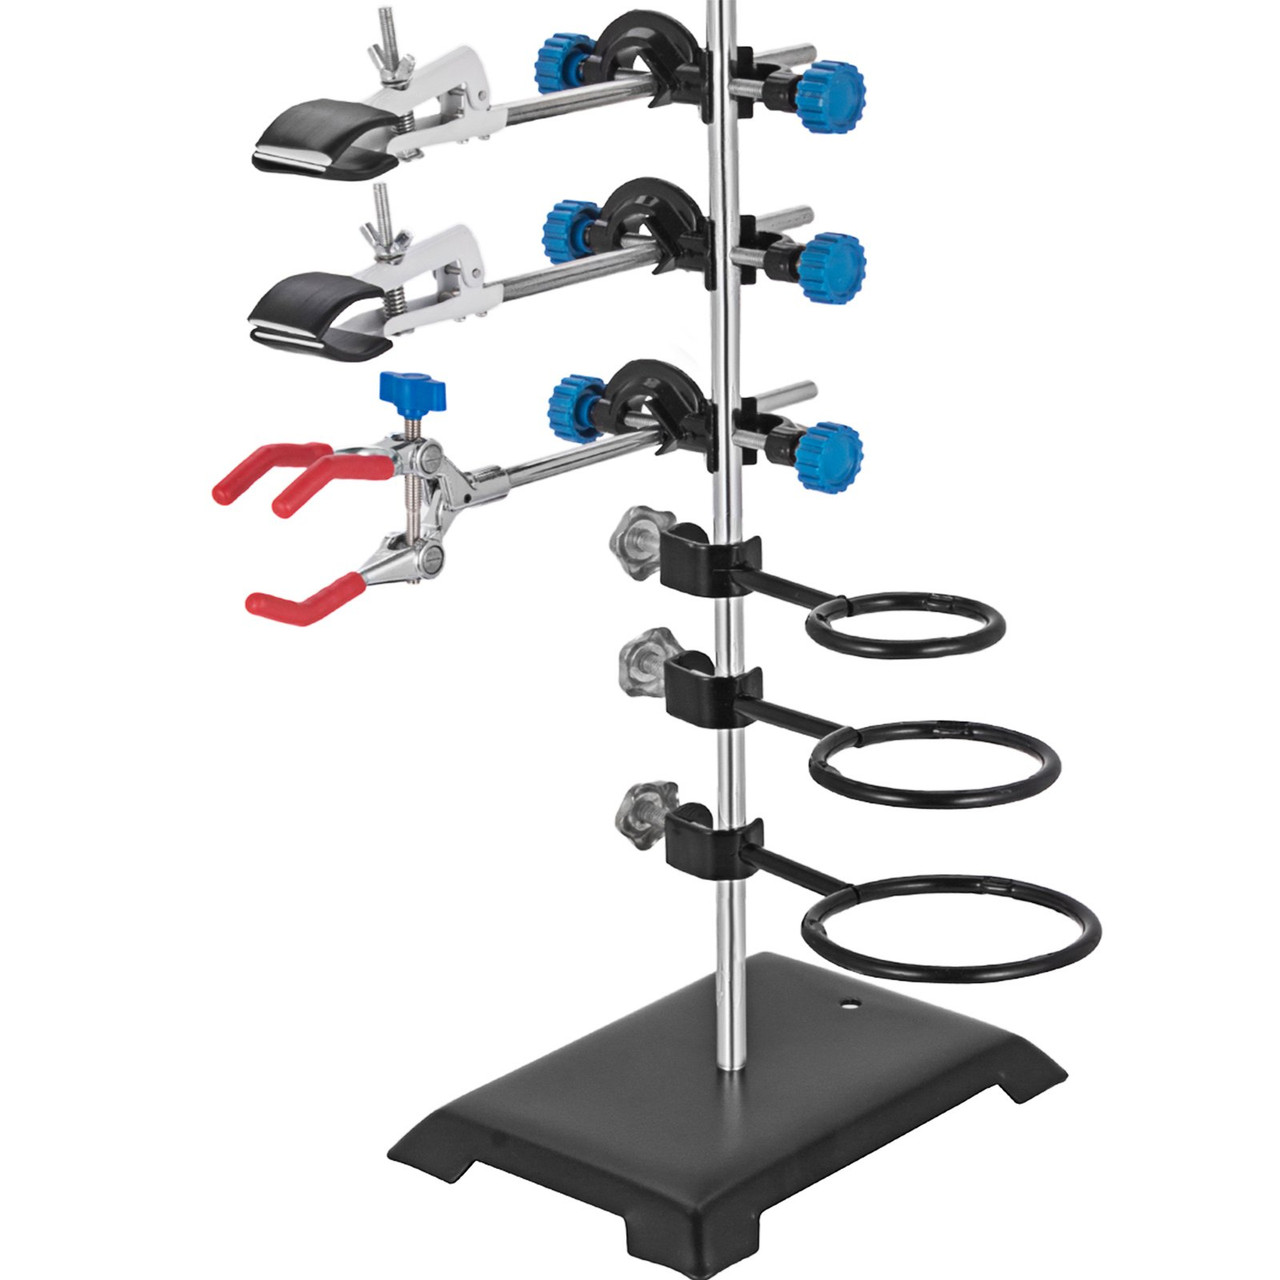 Laboratory Grade Metalware Set - Support Stand Premium Iron Material Laboratory Stand Support Lab Clamp Flask Clamp Condenser Stand 60cm